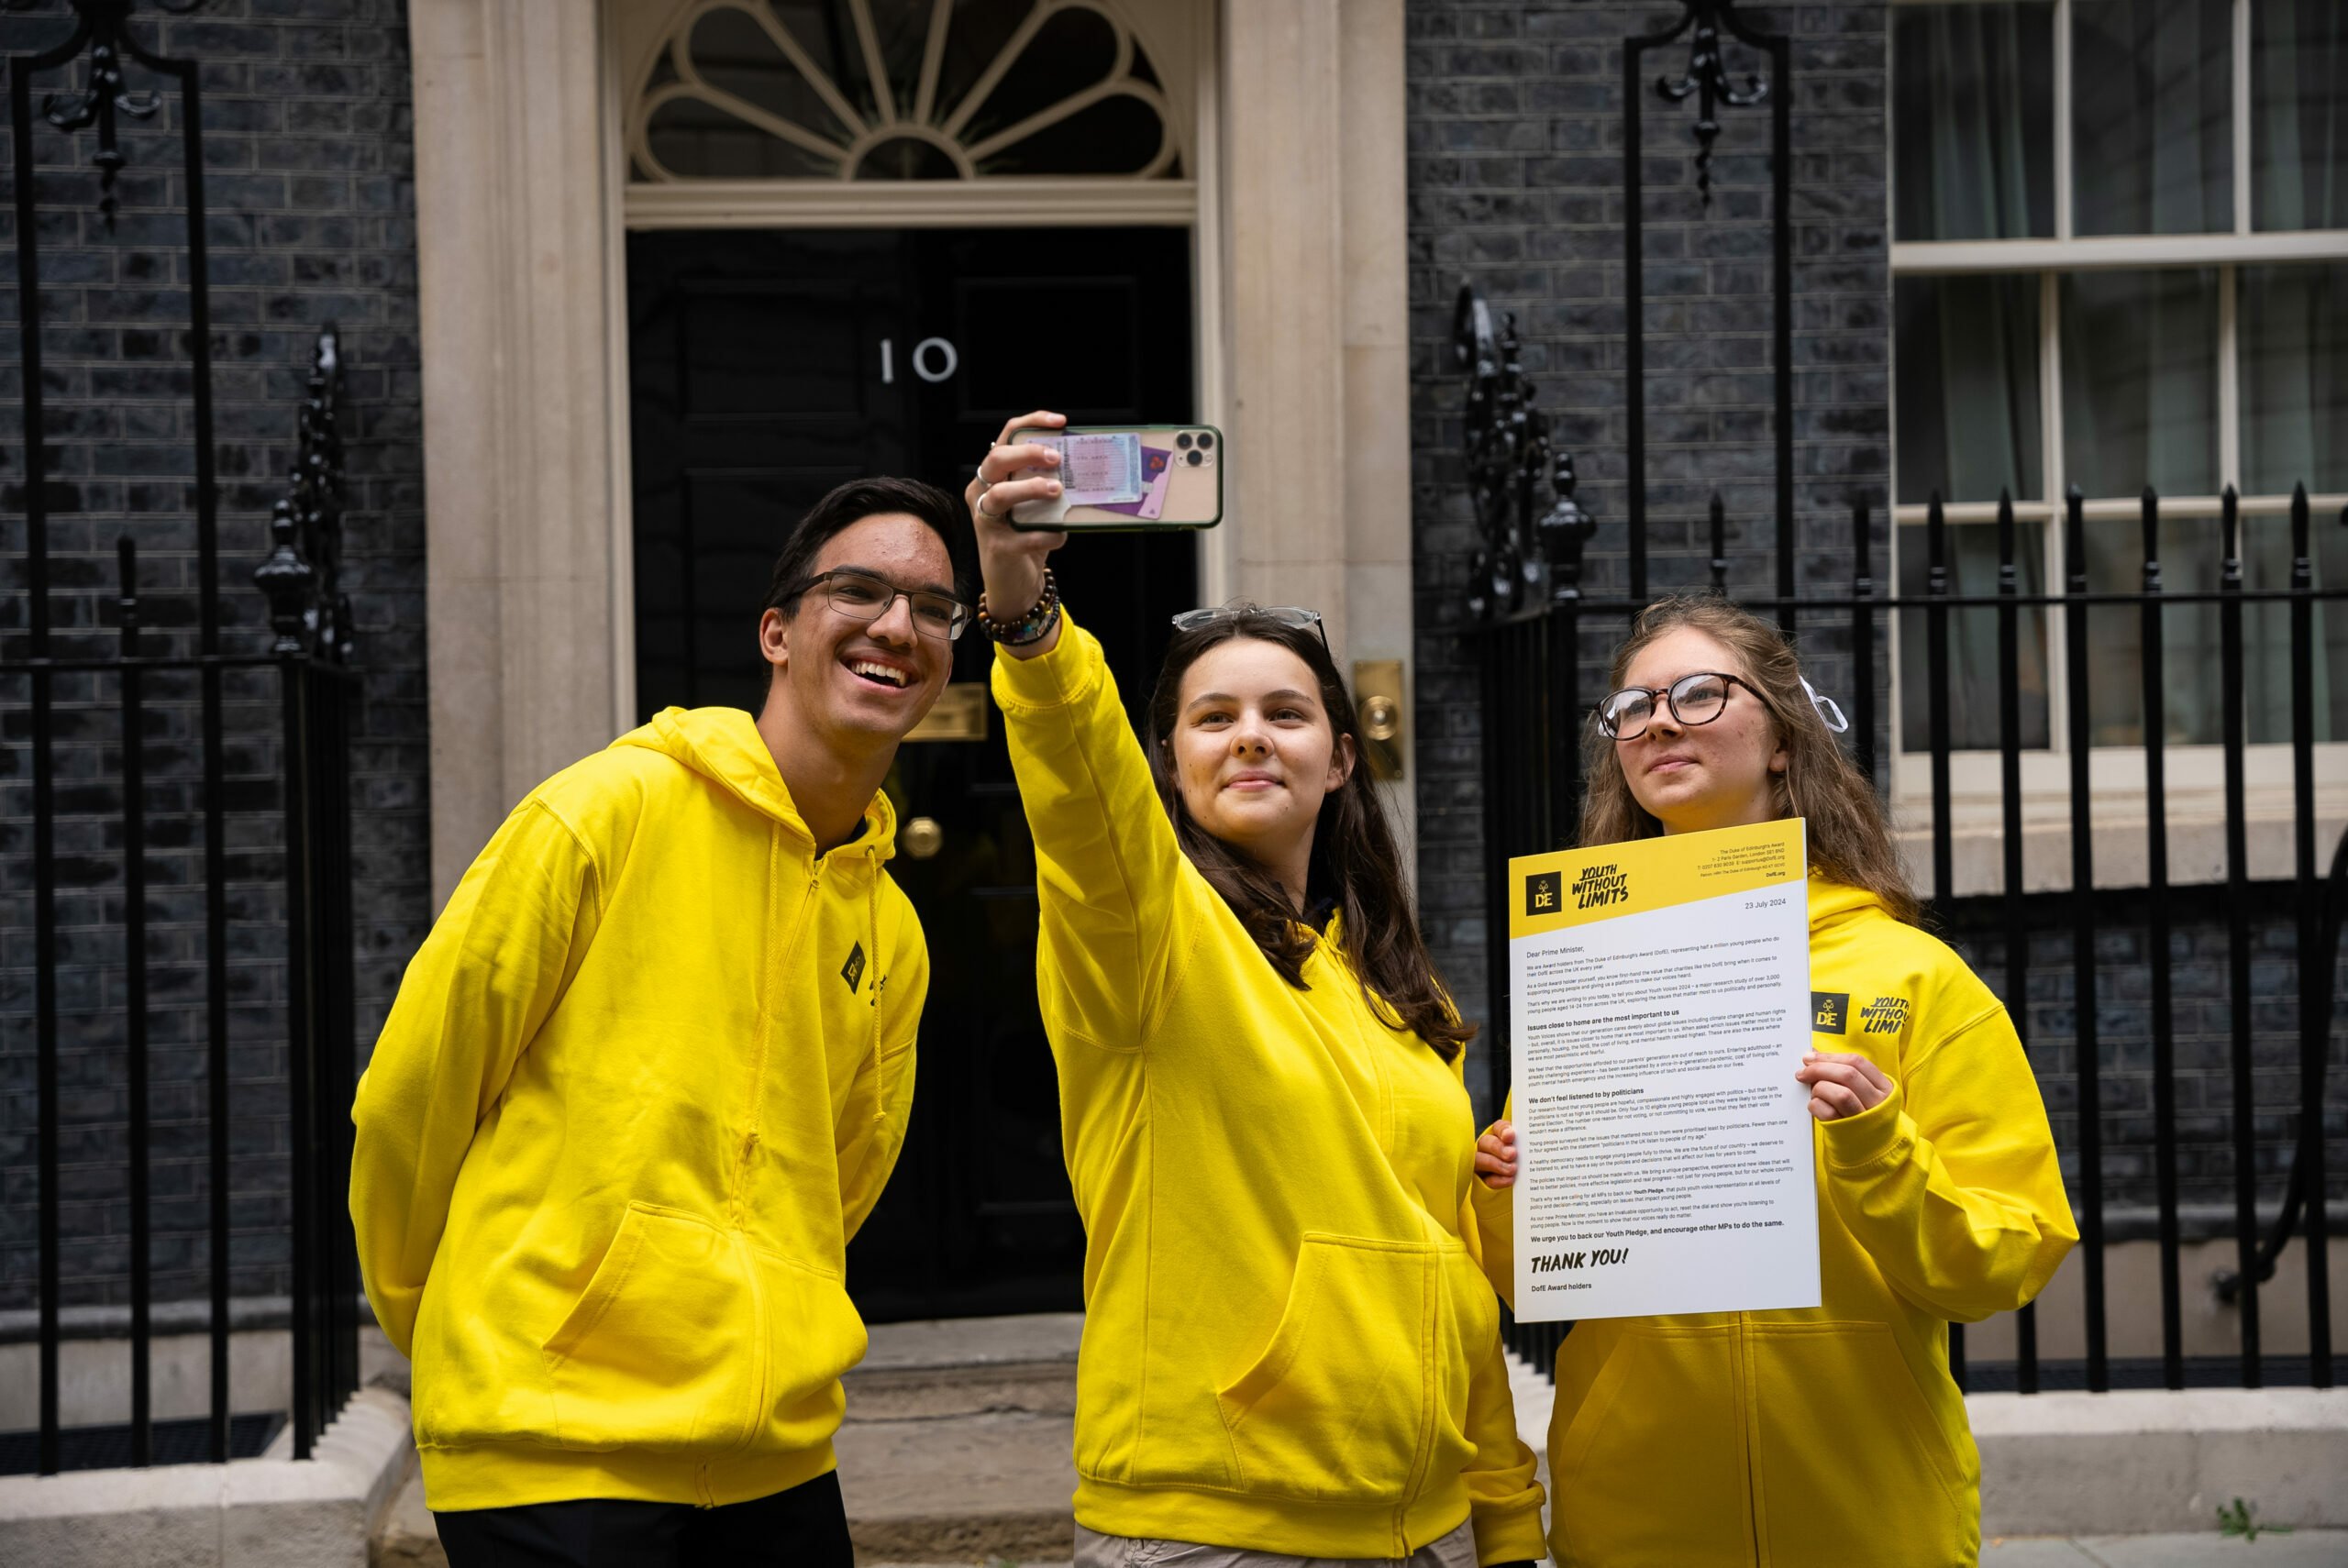 Three young people wearing yellow hoodies are standing in front of the iconic black door of 10 Downing Street. One of them is taking a selfie with a smartphone, while another is holding a document with the heading 